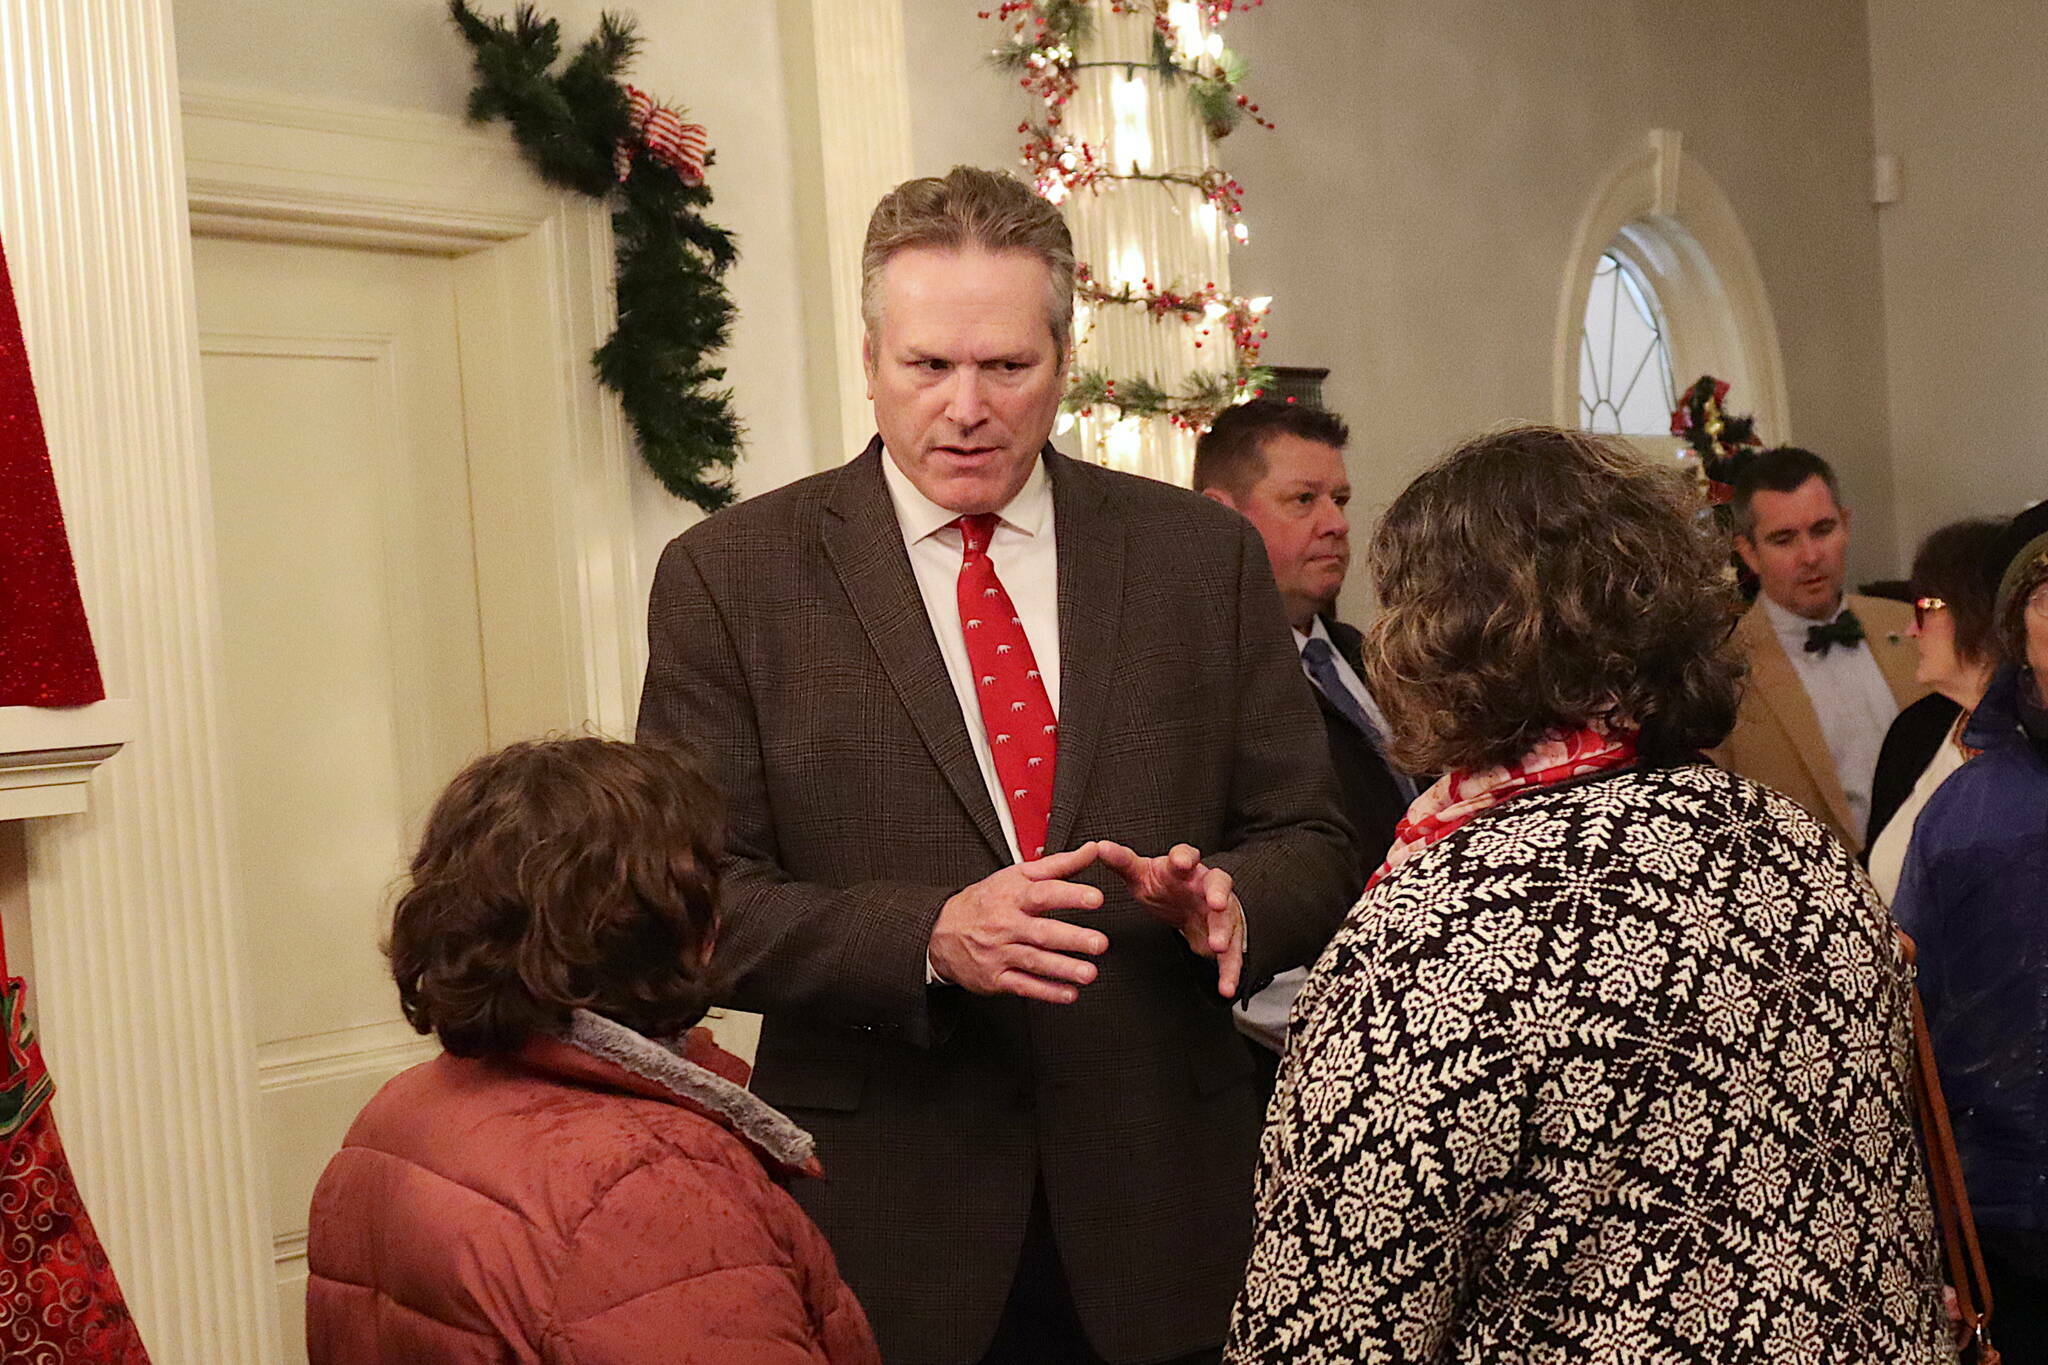 Gov. Mike Dunleavy greets visitors during the annual Holiday Open House at the Governor’s Residence on Dec. 12, 2023. (Mark Sabbatini / Juneau Empire file photo)